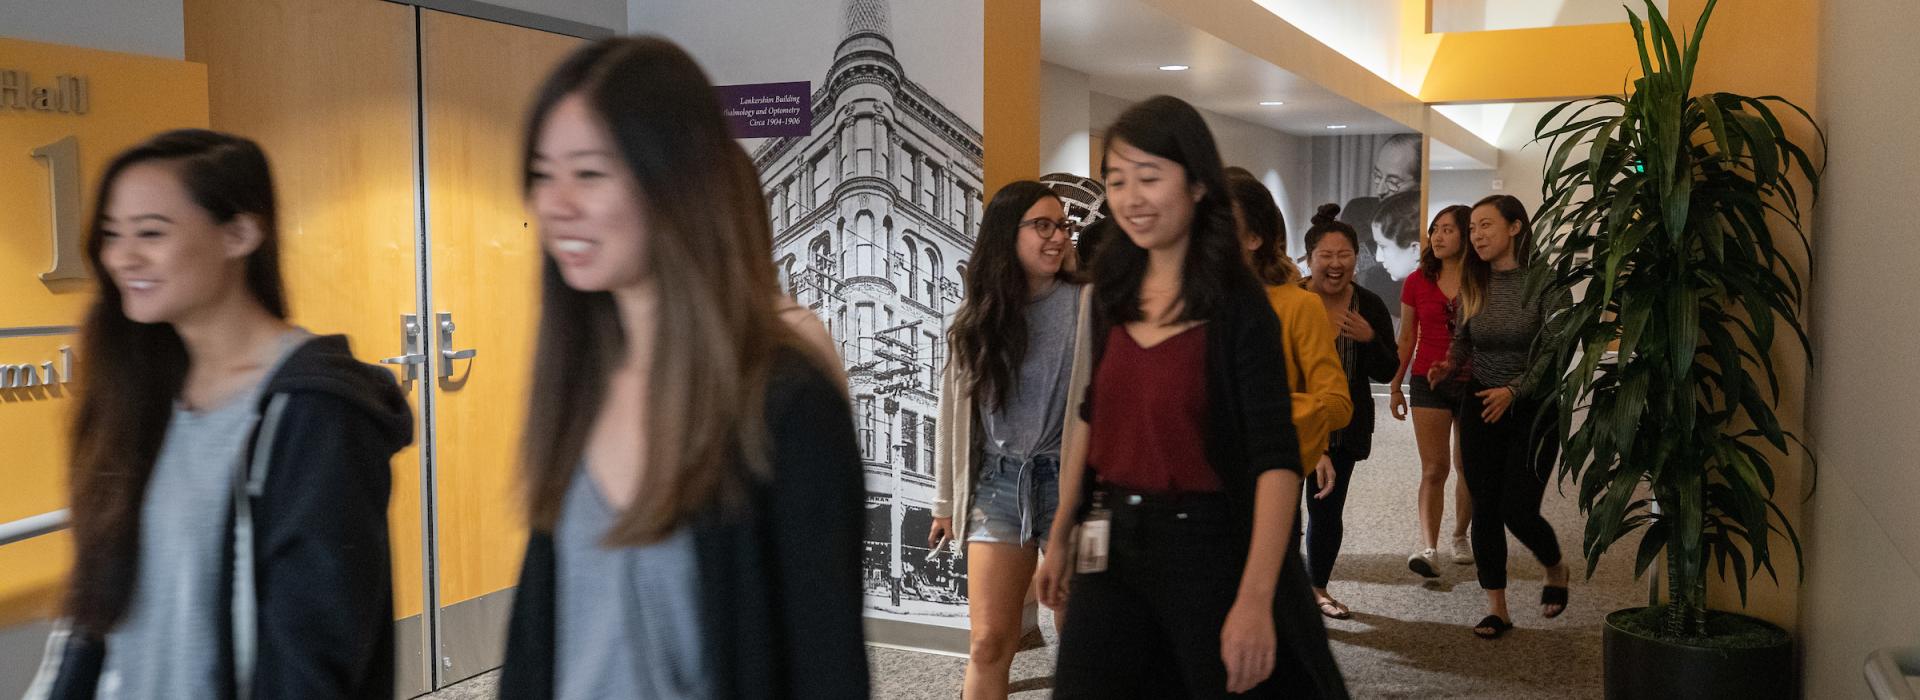 Students walking through lecture halls inside M.B. Ketchum Memorial Library